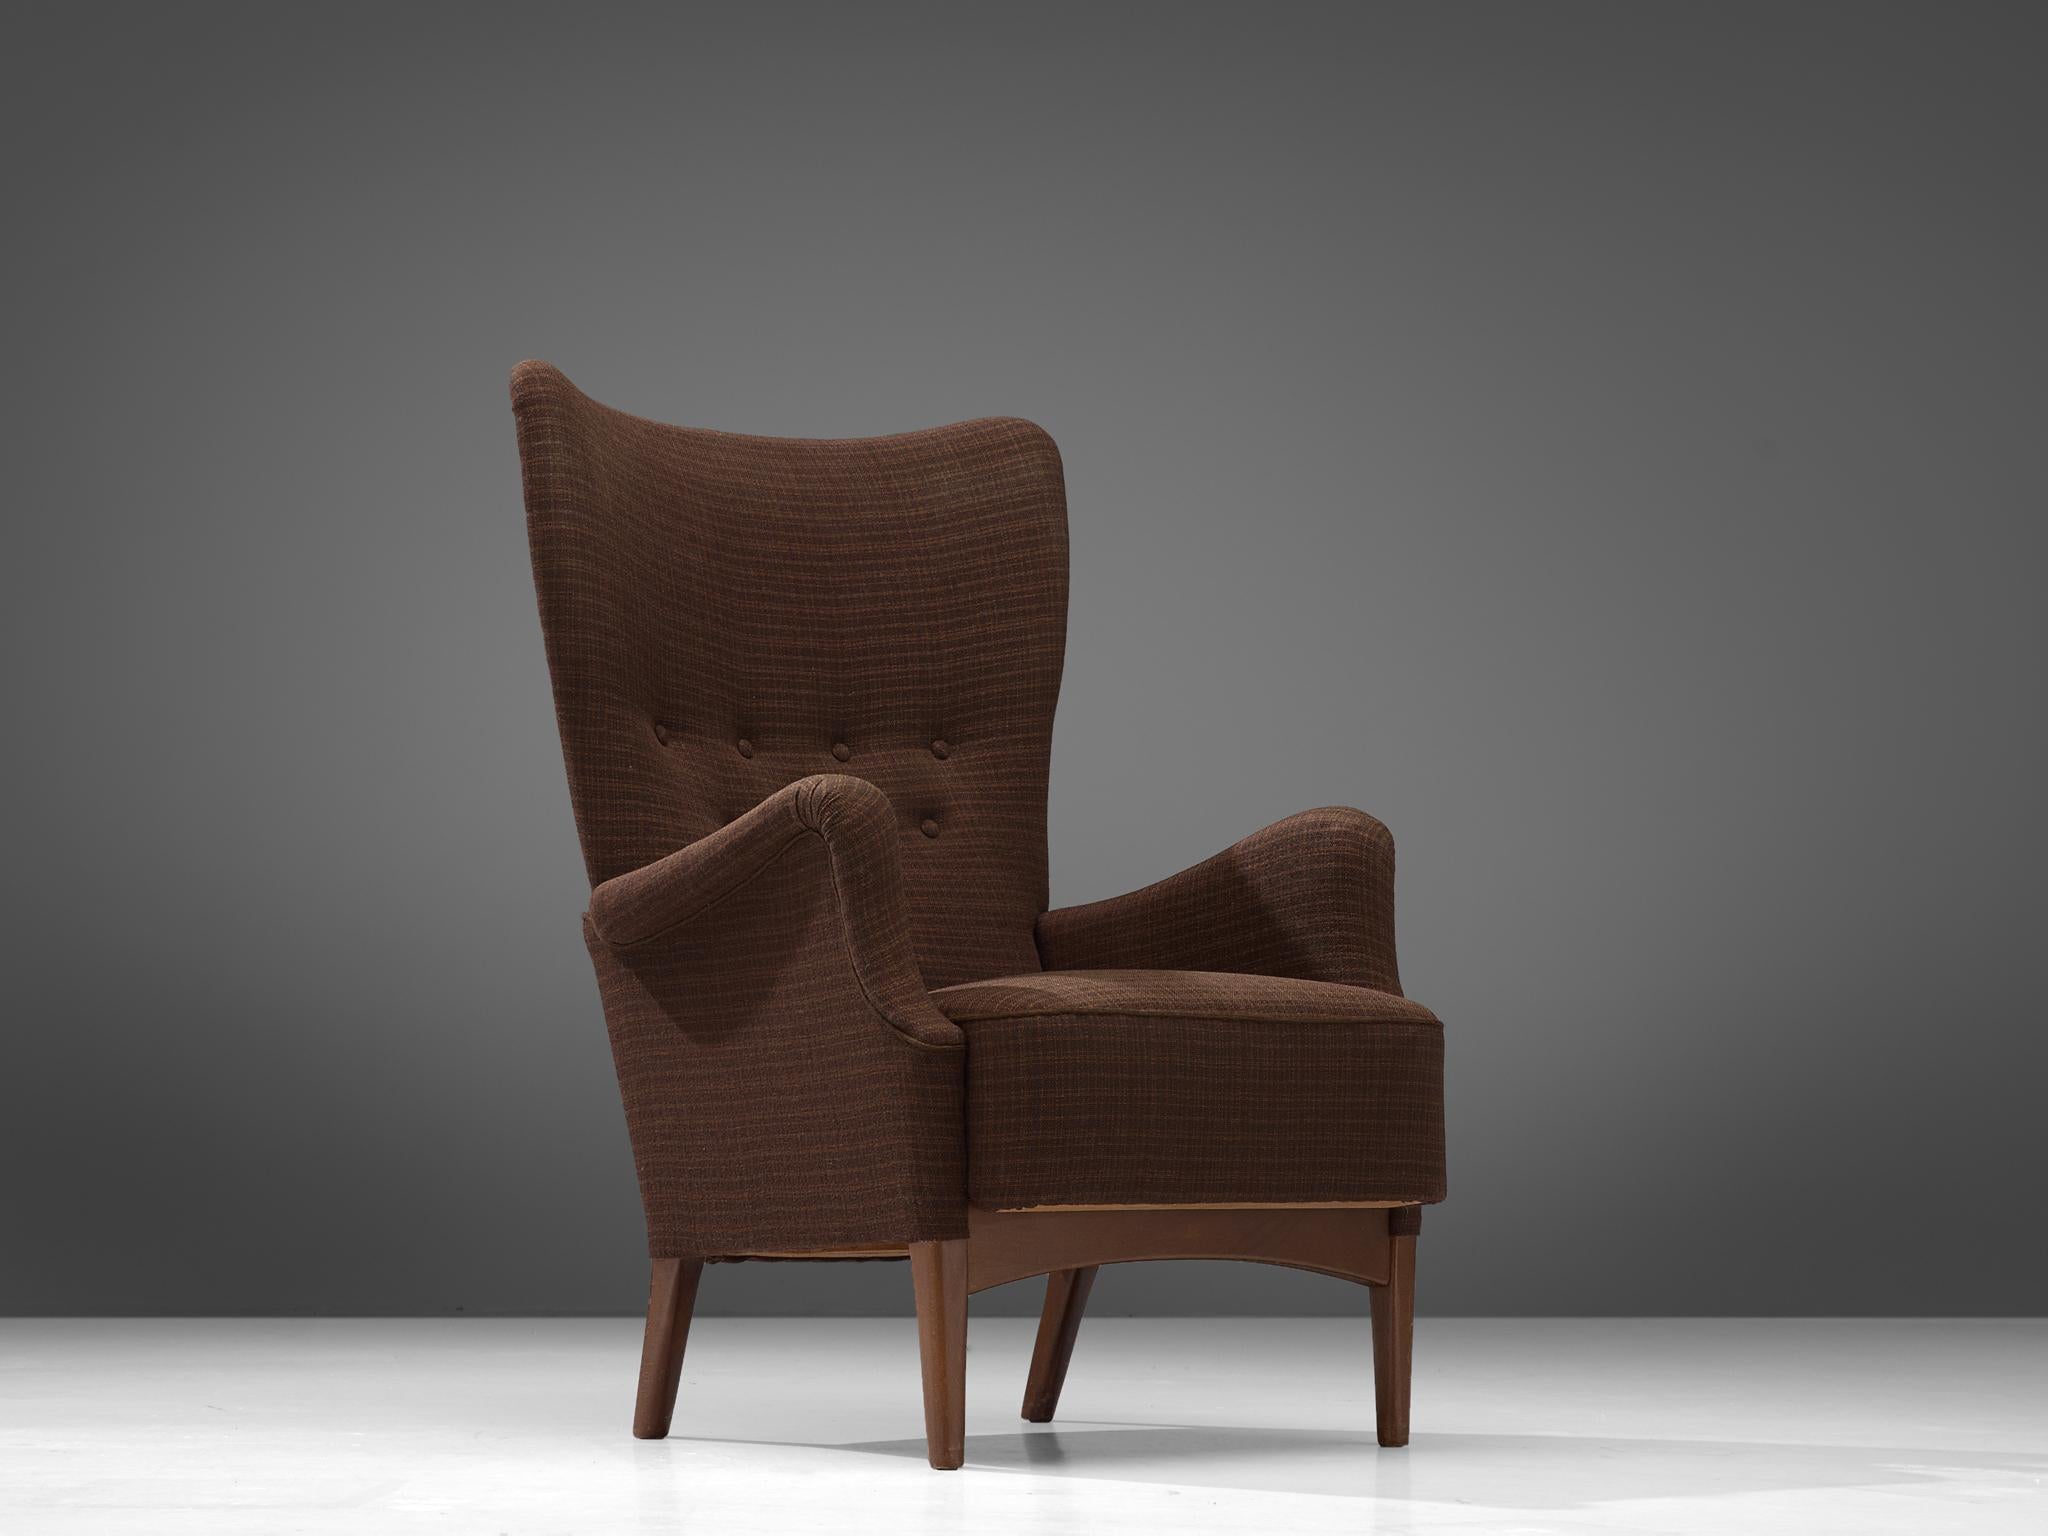 Armchair, brown fabric and beech, Denmark, 1950s

This stately and well-executed wingback chair shows an exquisite level of craftsmanship. The lines and finishes in this chair from 1950 are curvy yet crisp. The beech frame forms a solid and stabile